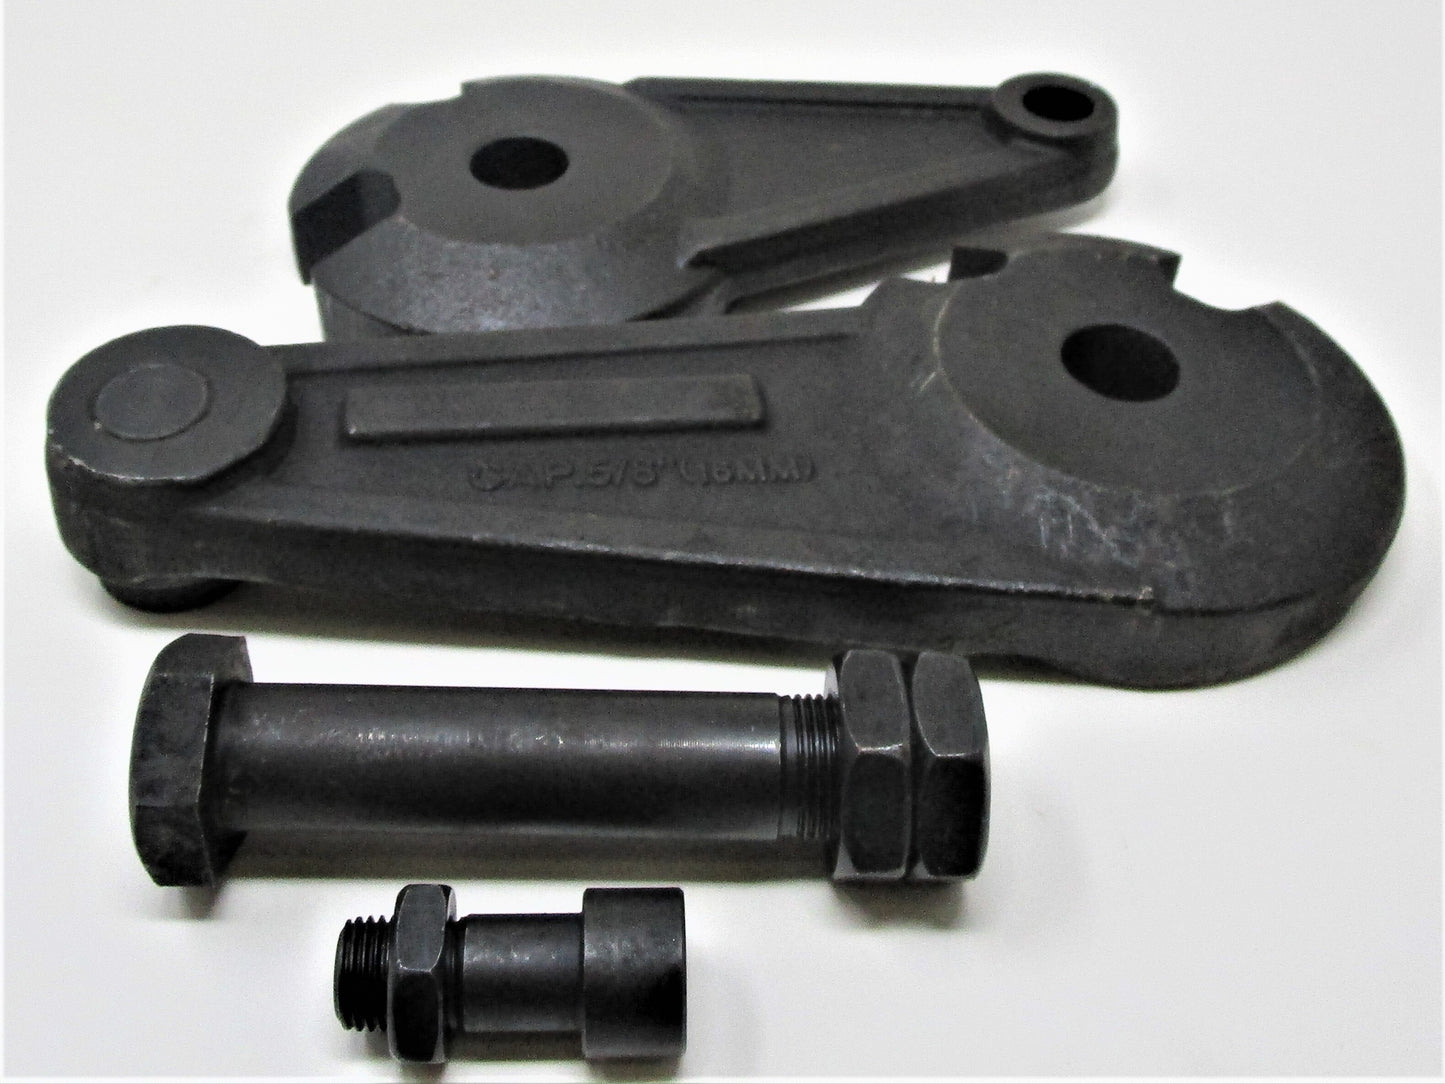 RH-16, Replacement Head for RCB-16N